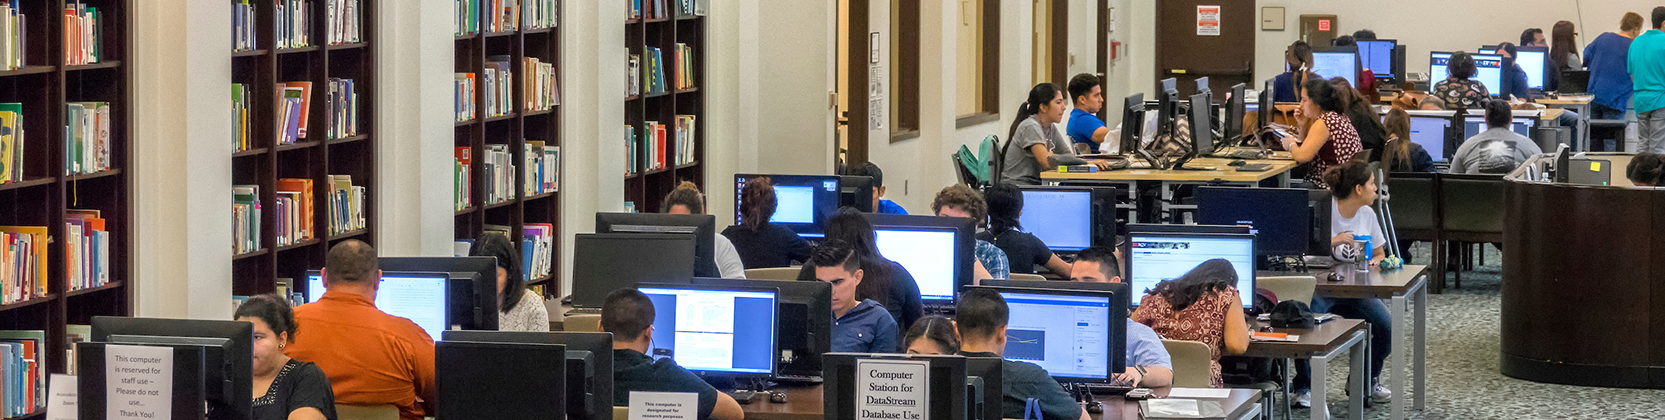 Students using the computers at the Brownsville Campus library.